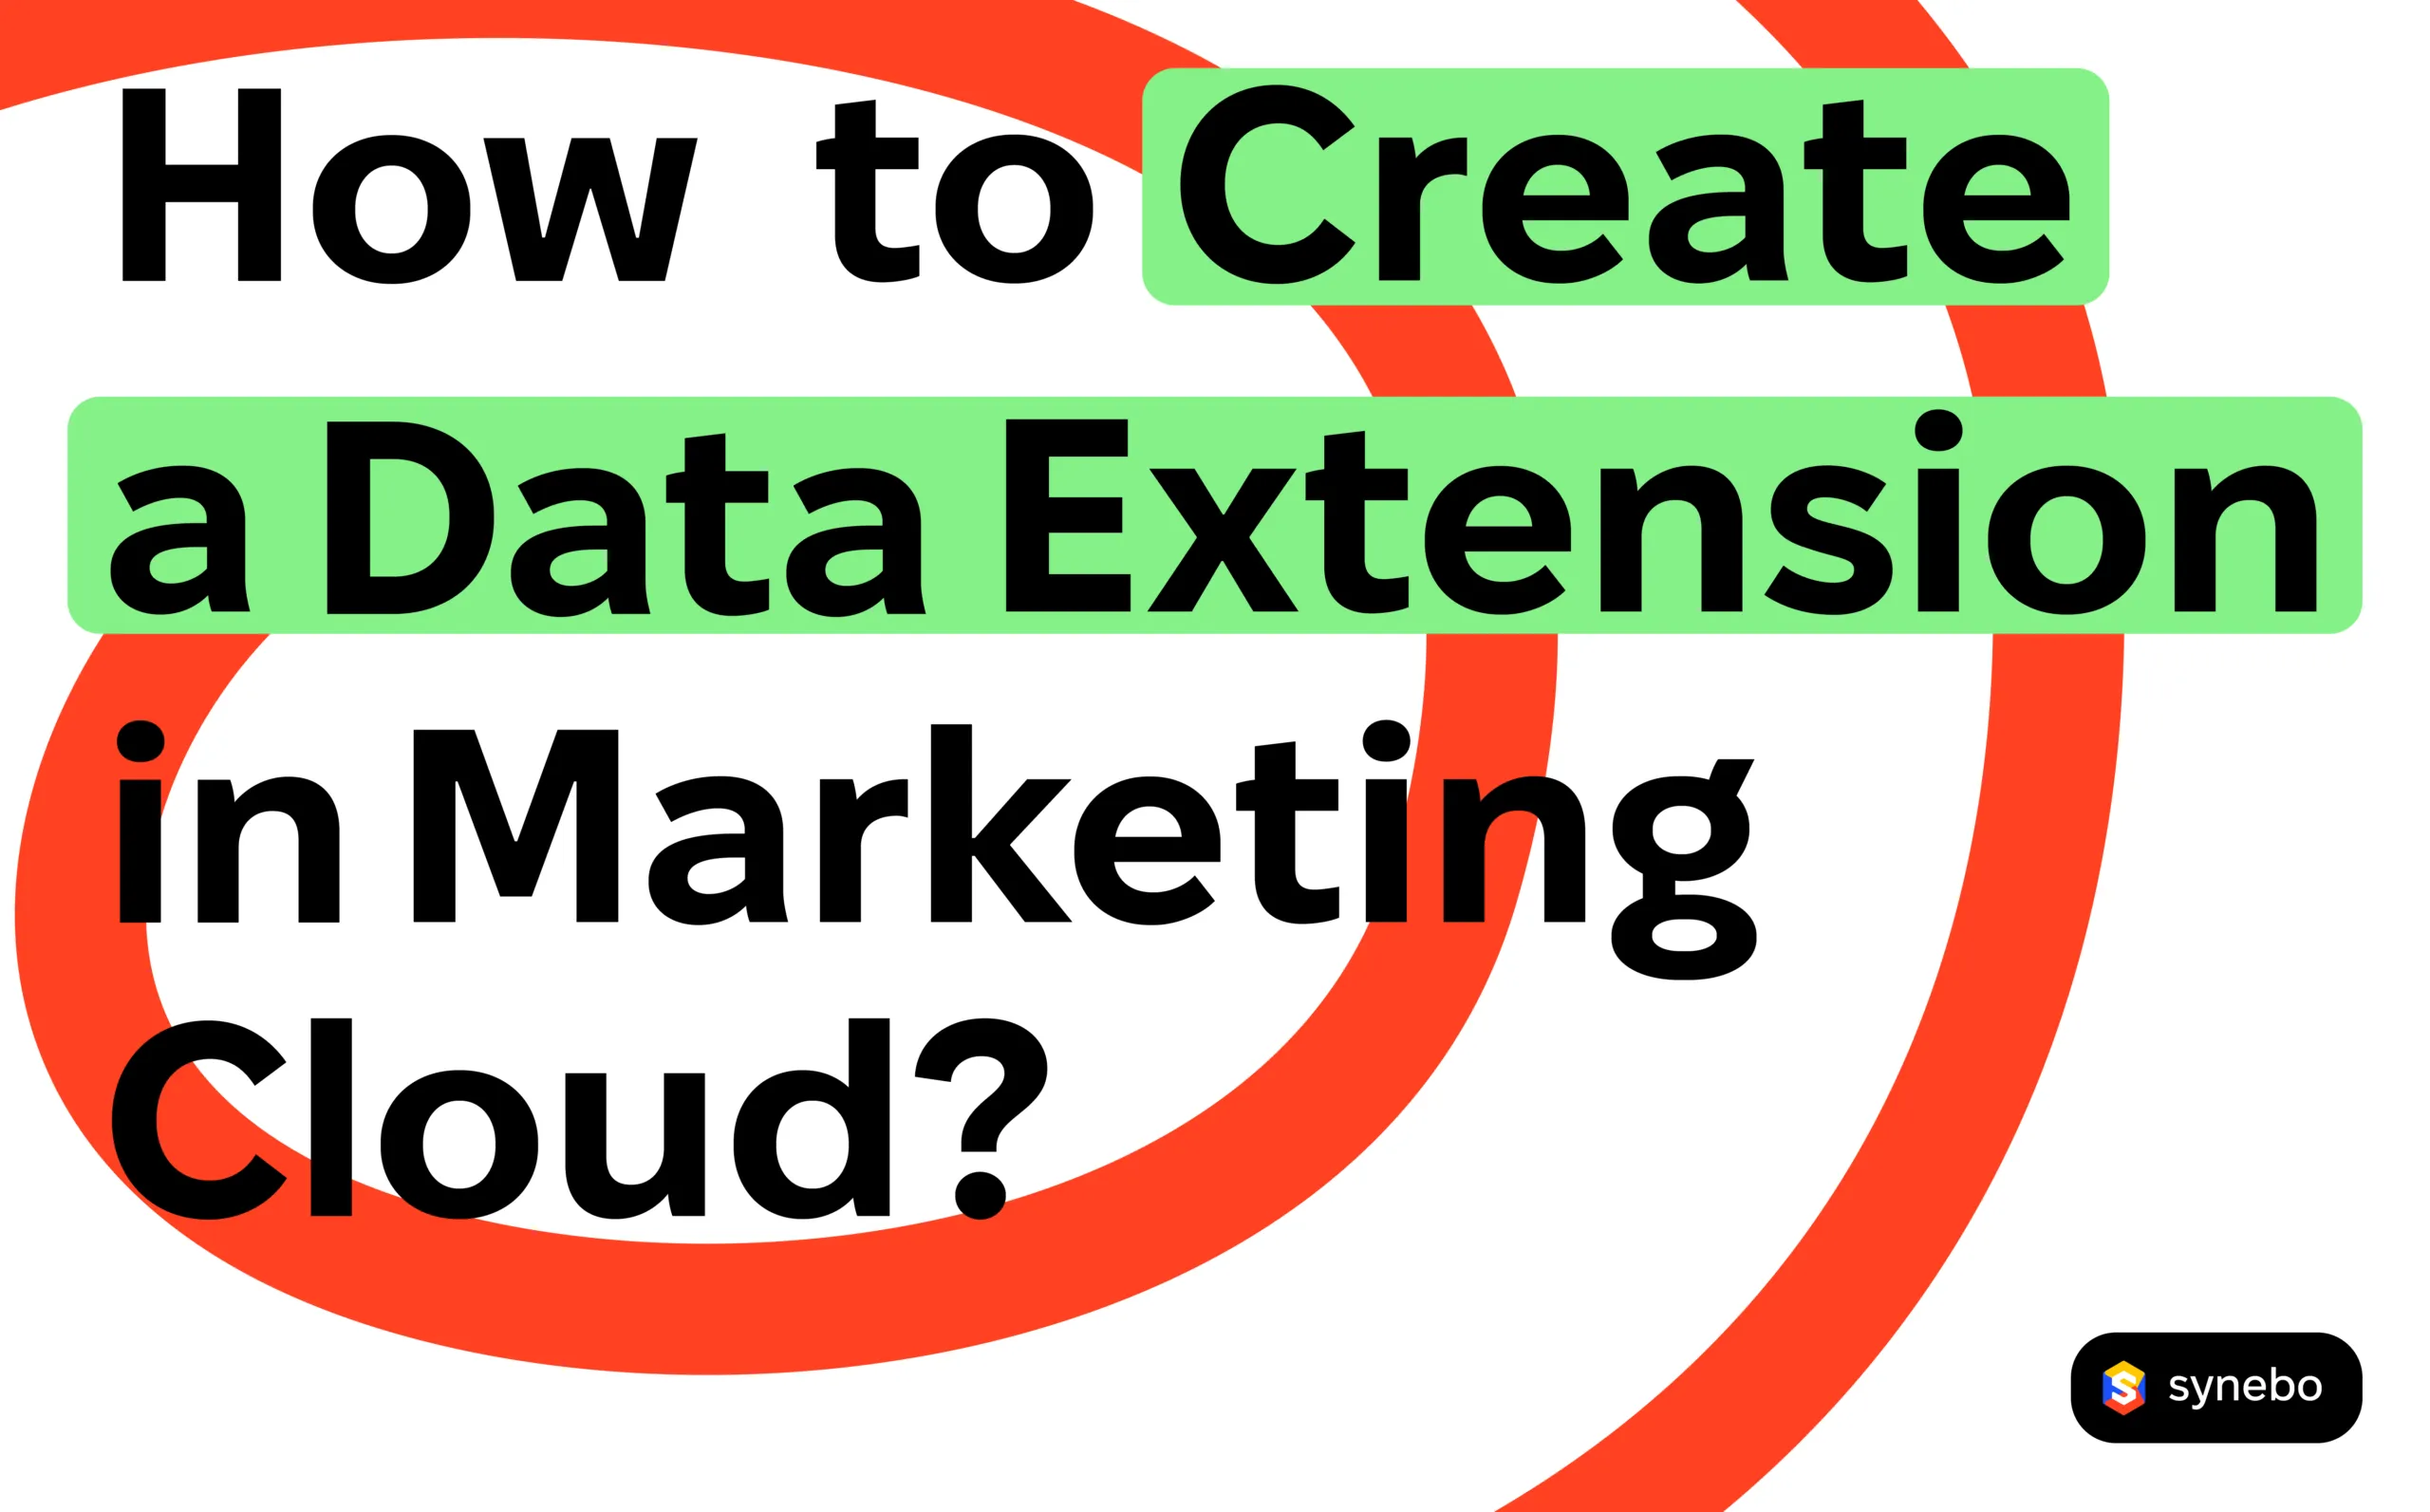 How to Create a Data Extension in Marketing Cloud